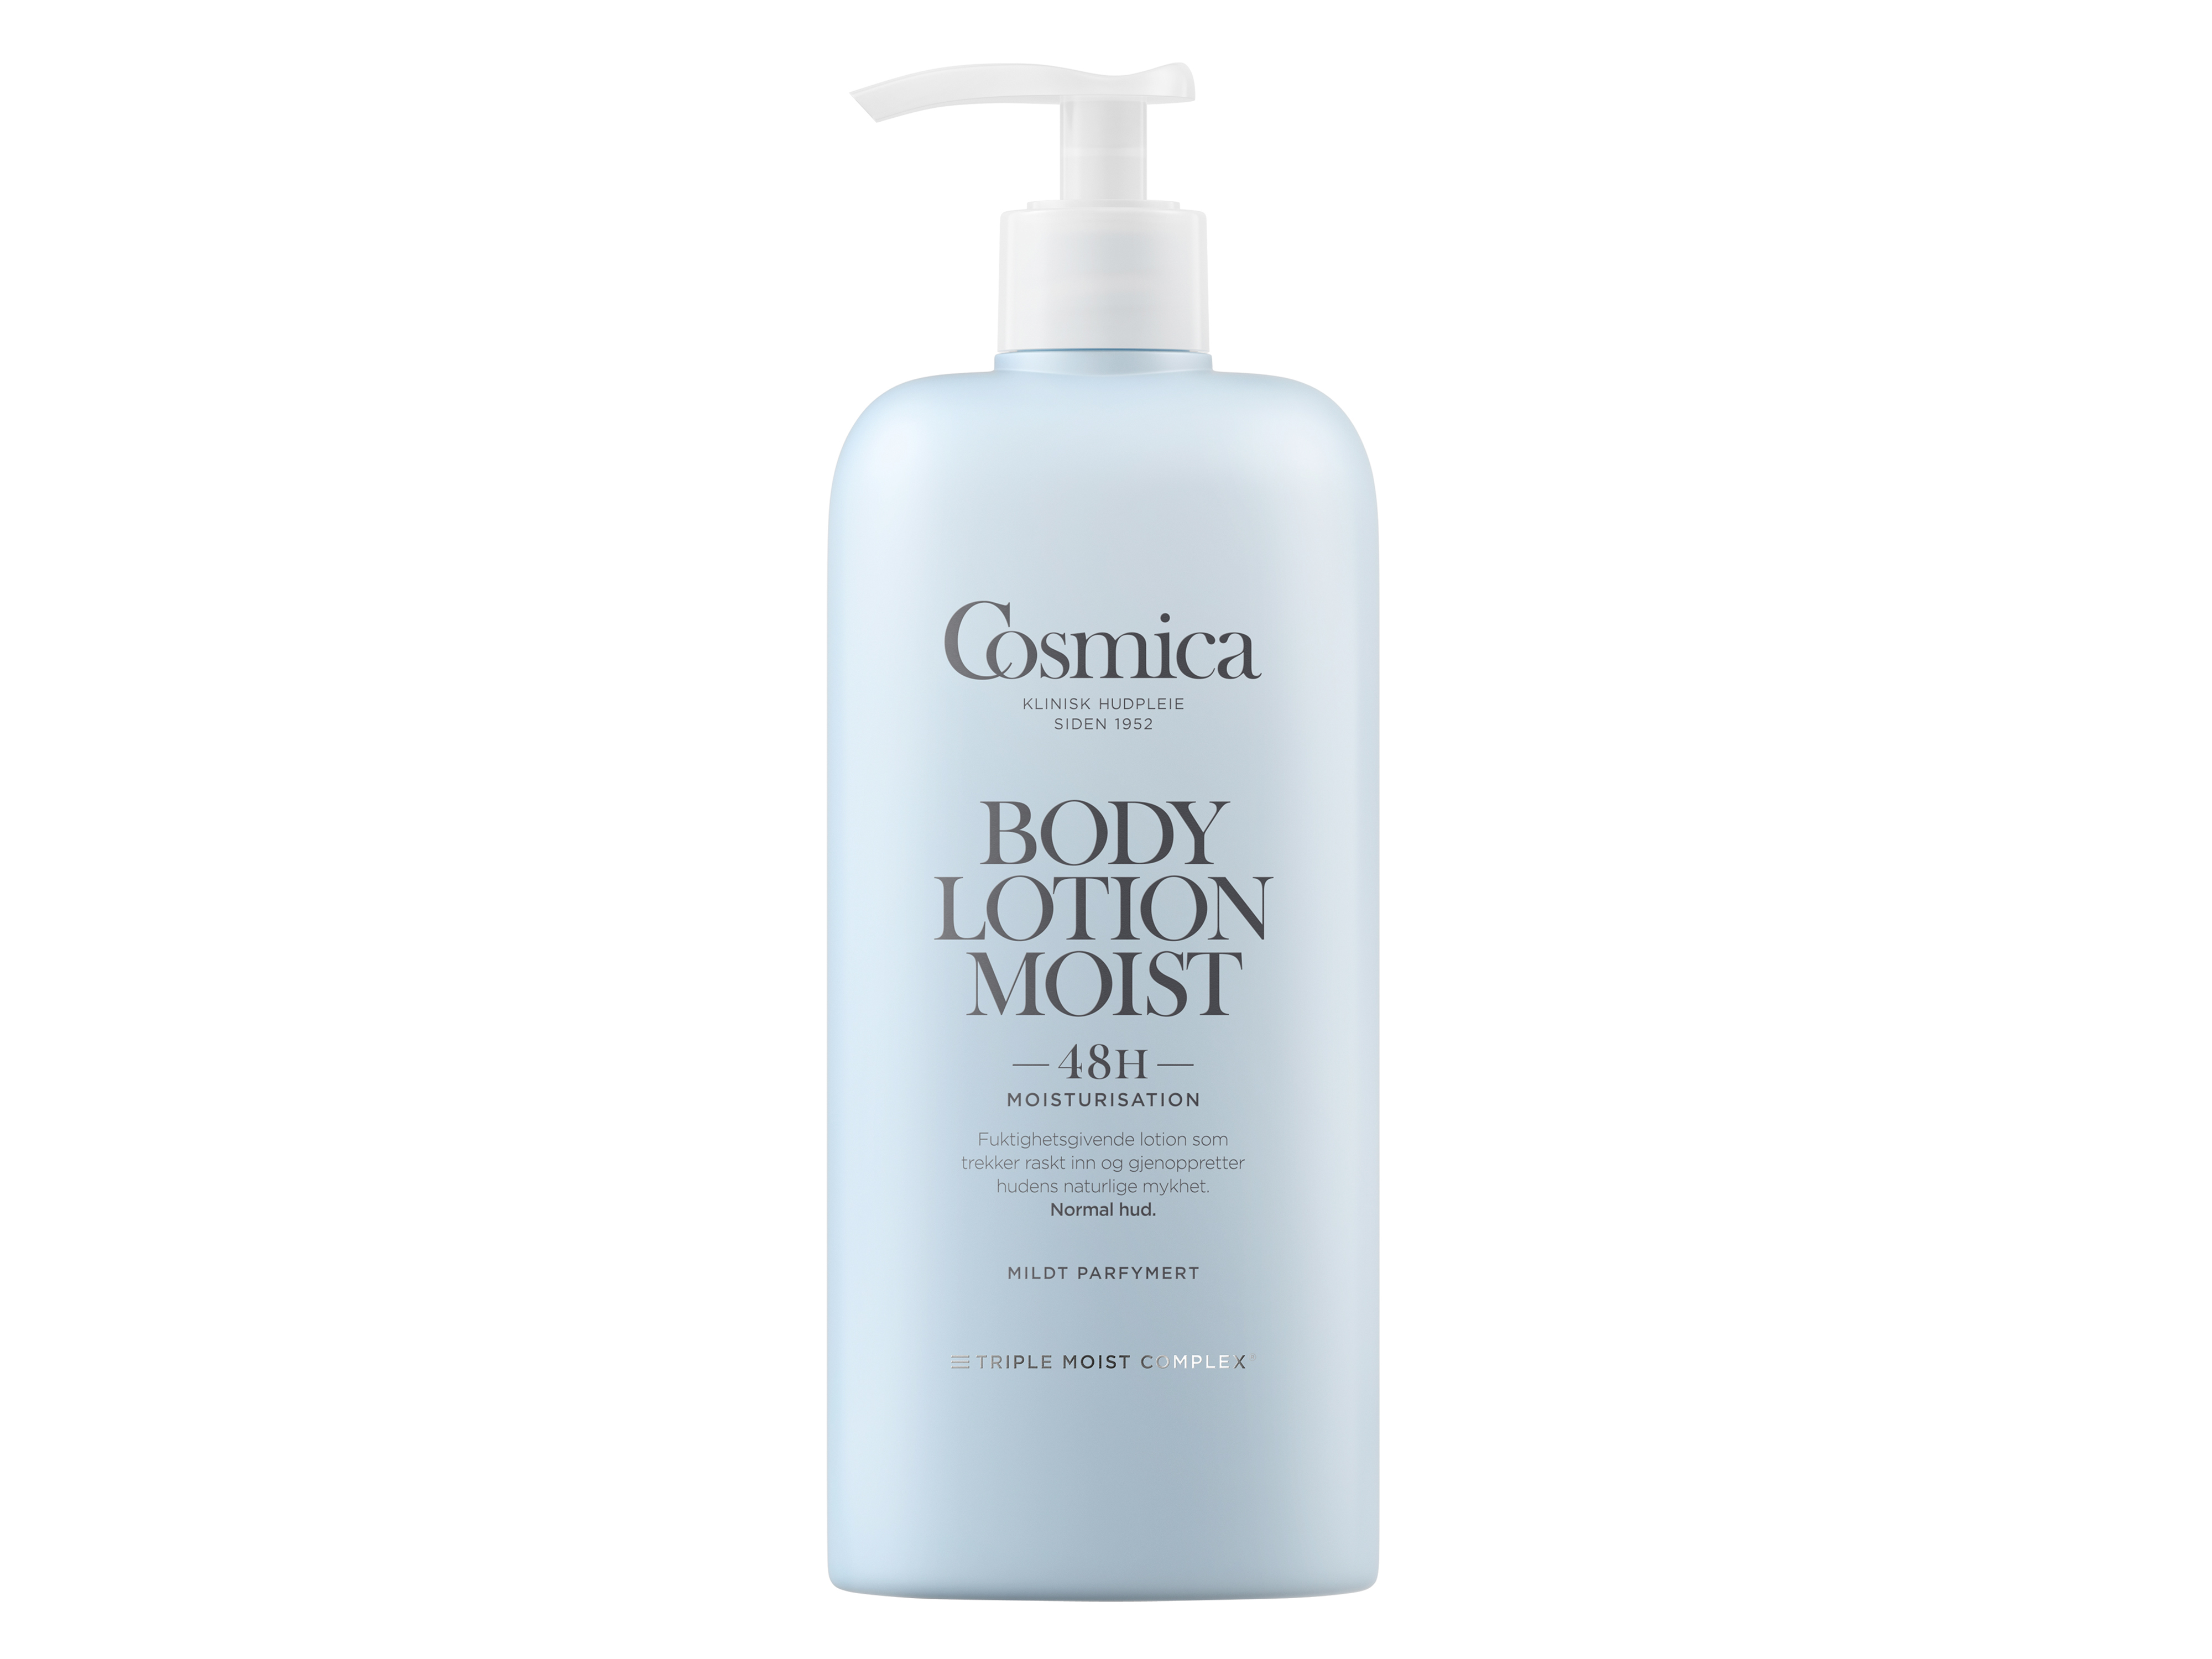 Cosmica Body Lotion Moist med parfyme, 400 ml